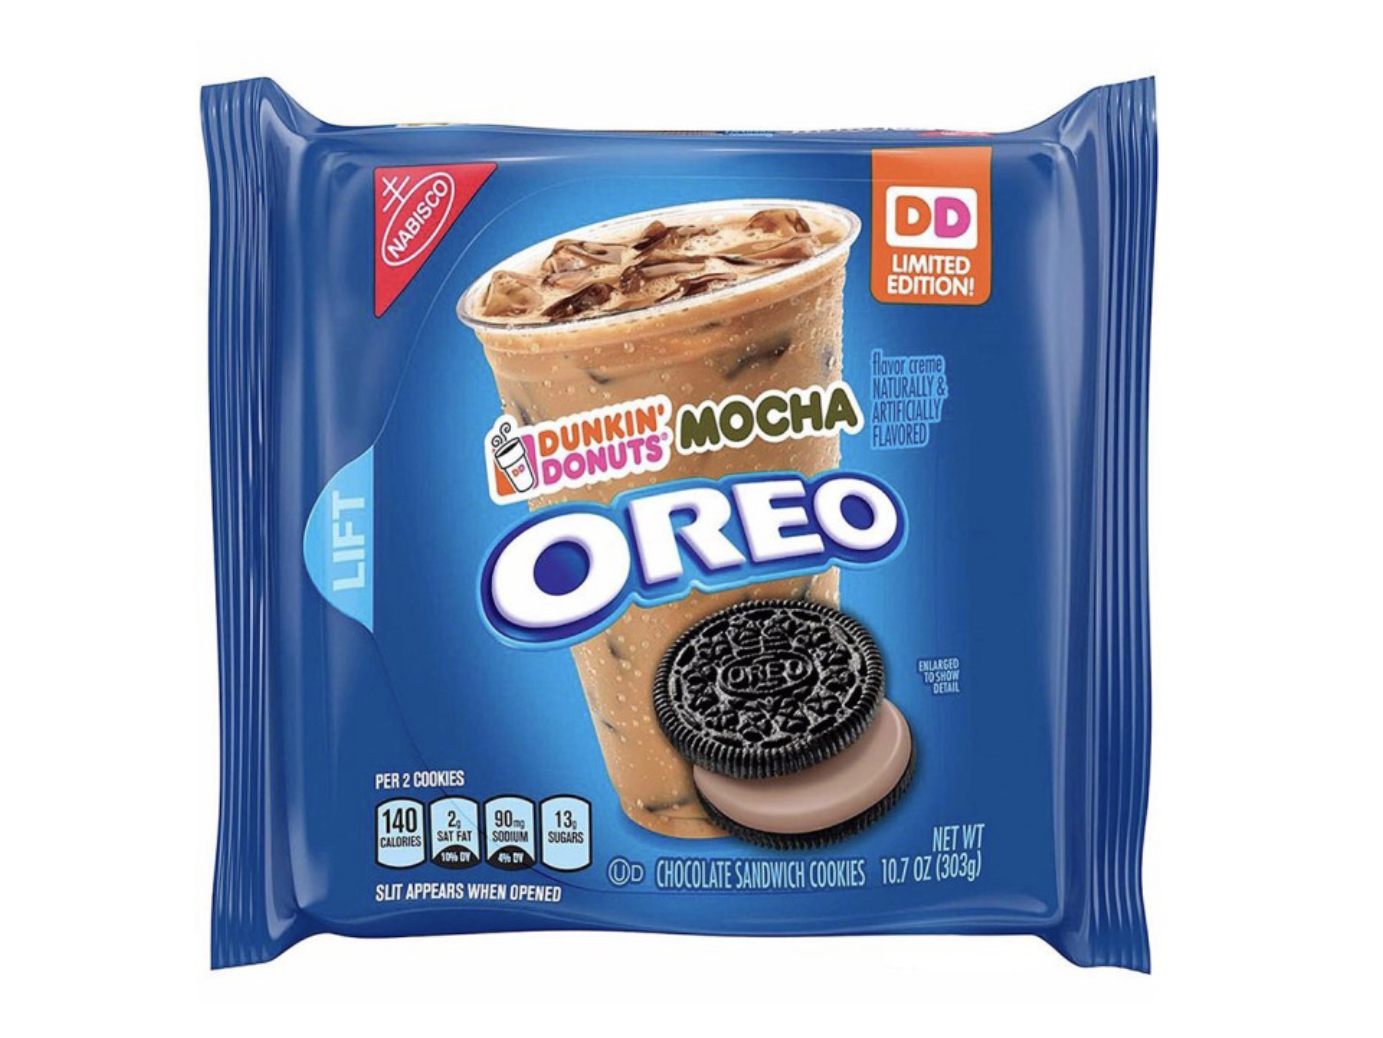 Worst Oreo Collabs - dunkin donuts mocha oreo - Lift Nabisco Bo Bundin Mocha Donuts Oreo Per 2 Cookies "Aaa 140 90 13, Caldras At Fat Som Sugars Slit Appears When Opened Ored Dd Limited Edition! Naturally& Artificially Flavored Ikasie Wish Net Wt Od Choco